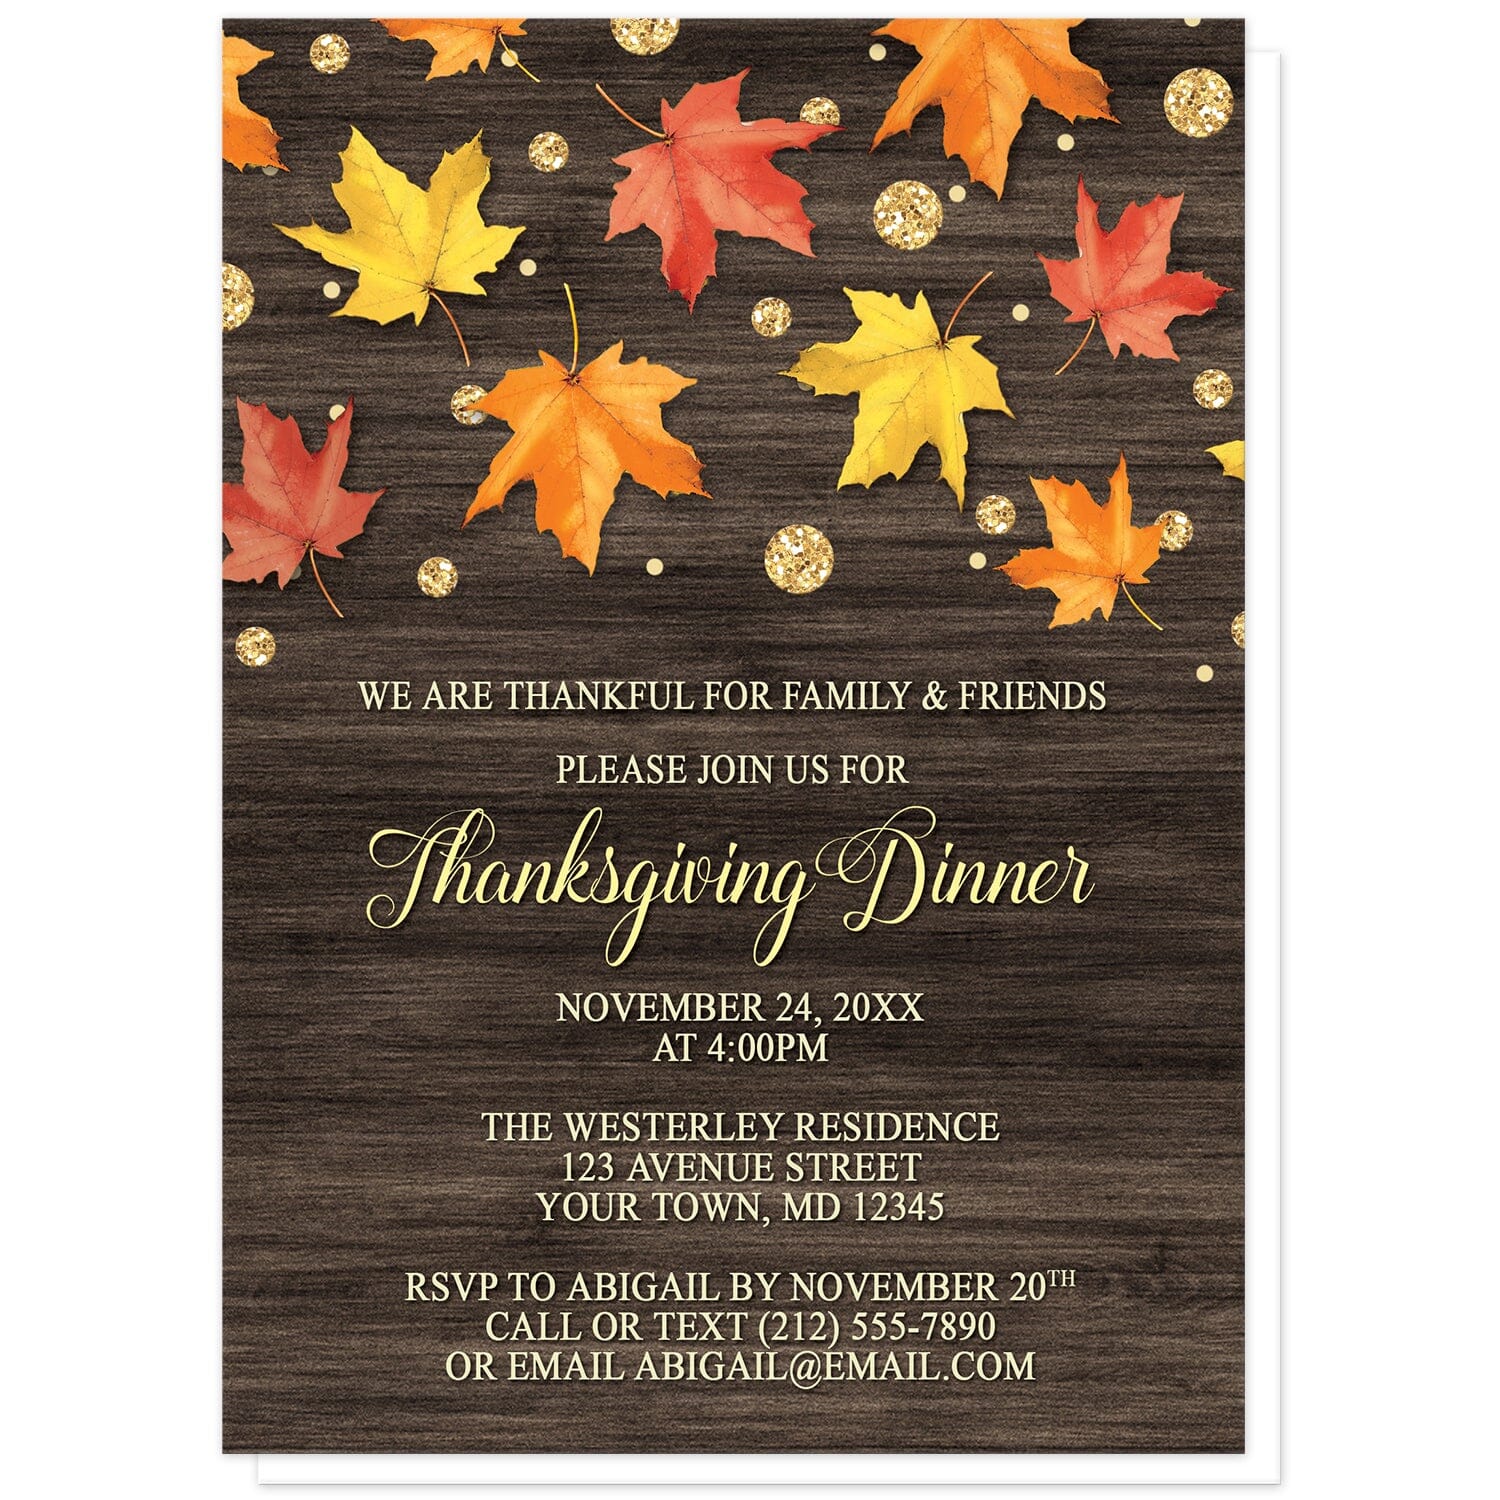 Falling Leaves with Gold Autumn Thanksgiving Invitations at Artistically Invited. Beautiful rustic falling leaves with gold autumn Thanksgiving invitations with red, orange, and yellow leaves scattered and falling along the top, coupled with gold-colored glitter-illustrated circles, over a dark brown wood background. Your personalized Thanksgiving dinner details are custom printed in yellow and a light gold color over the wood background below the pretty leaves.